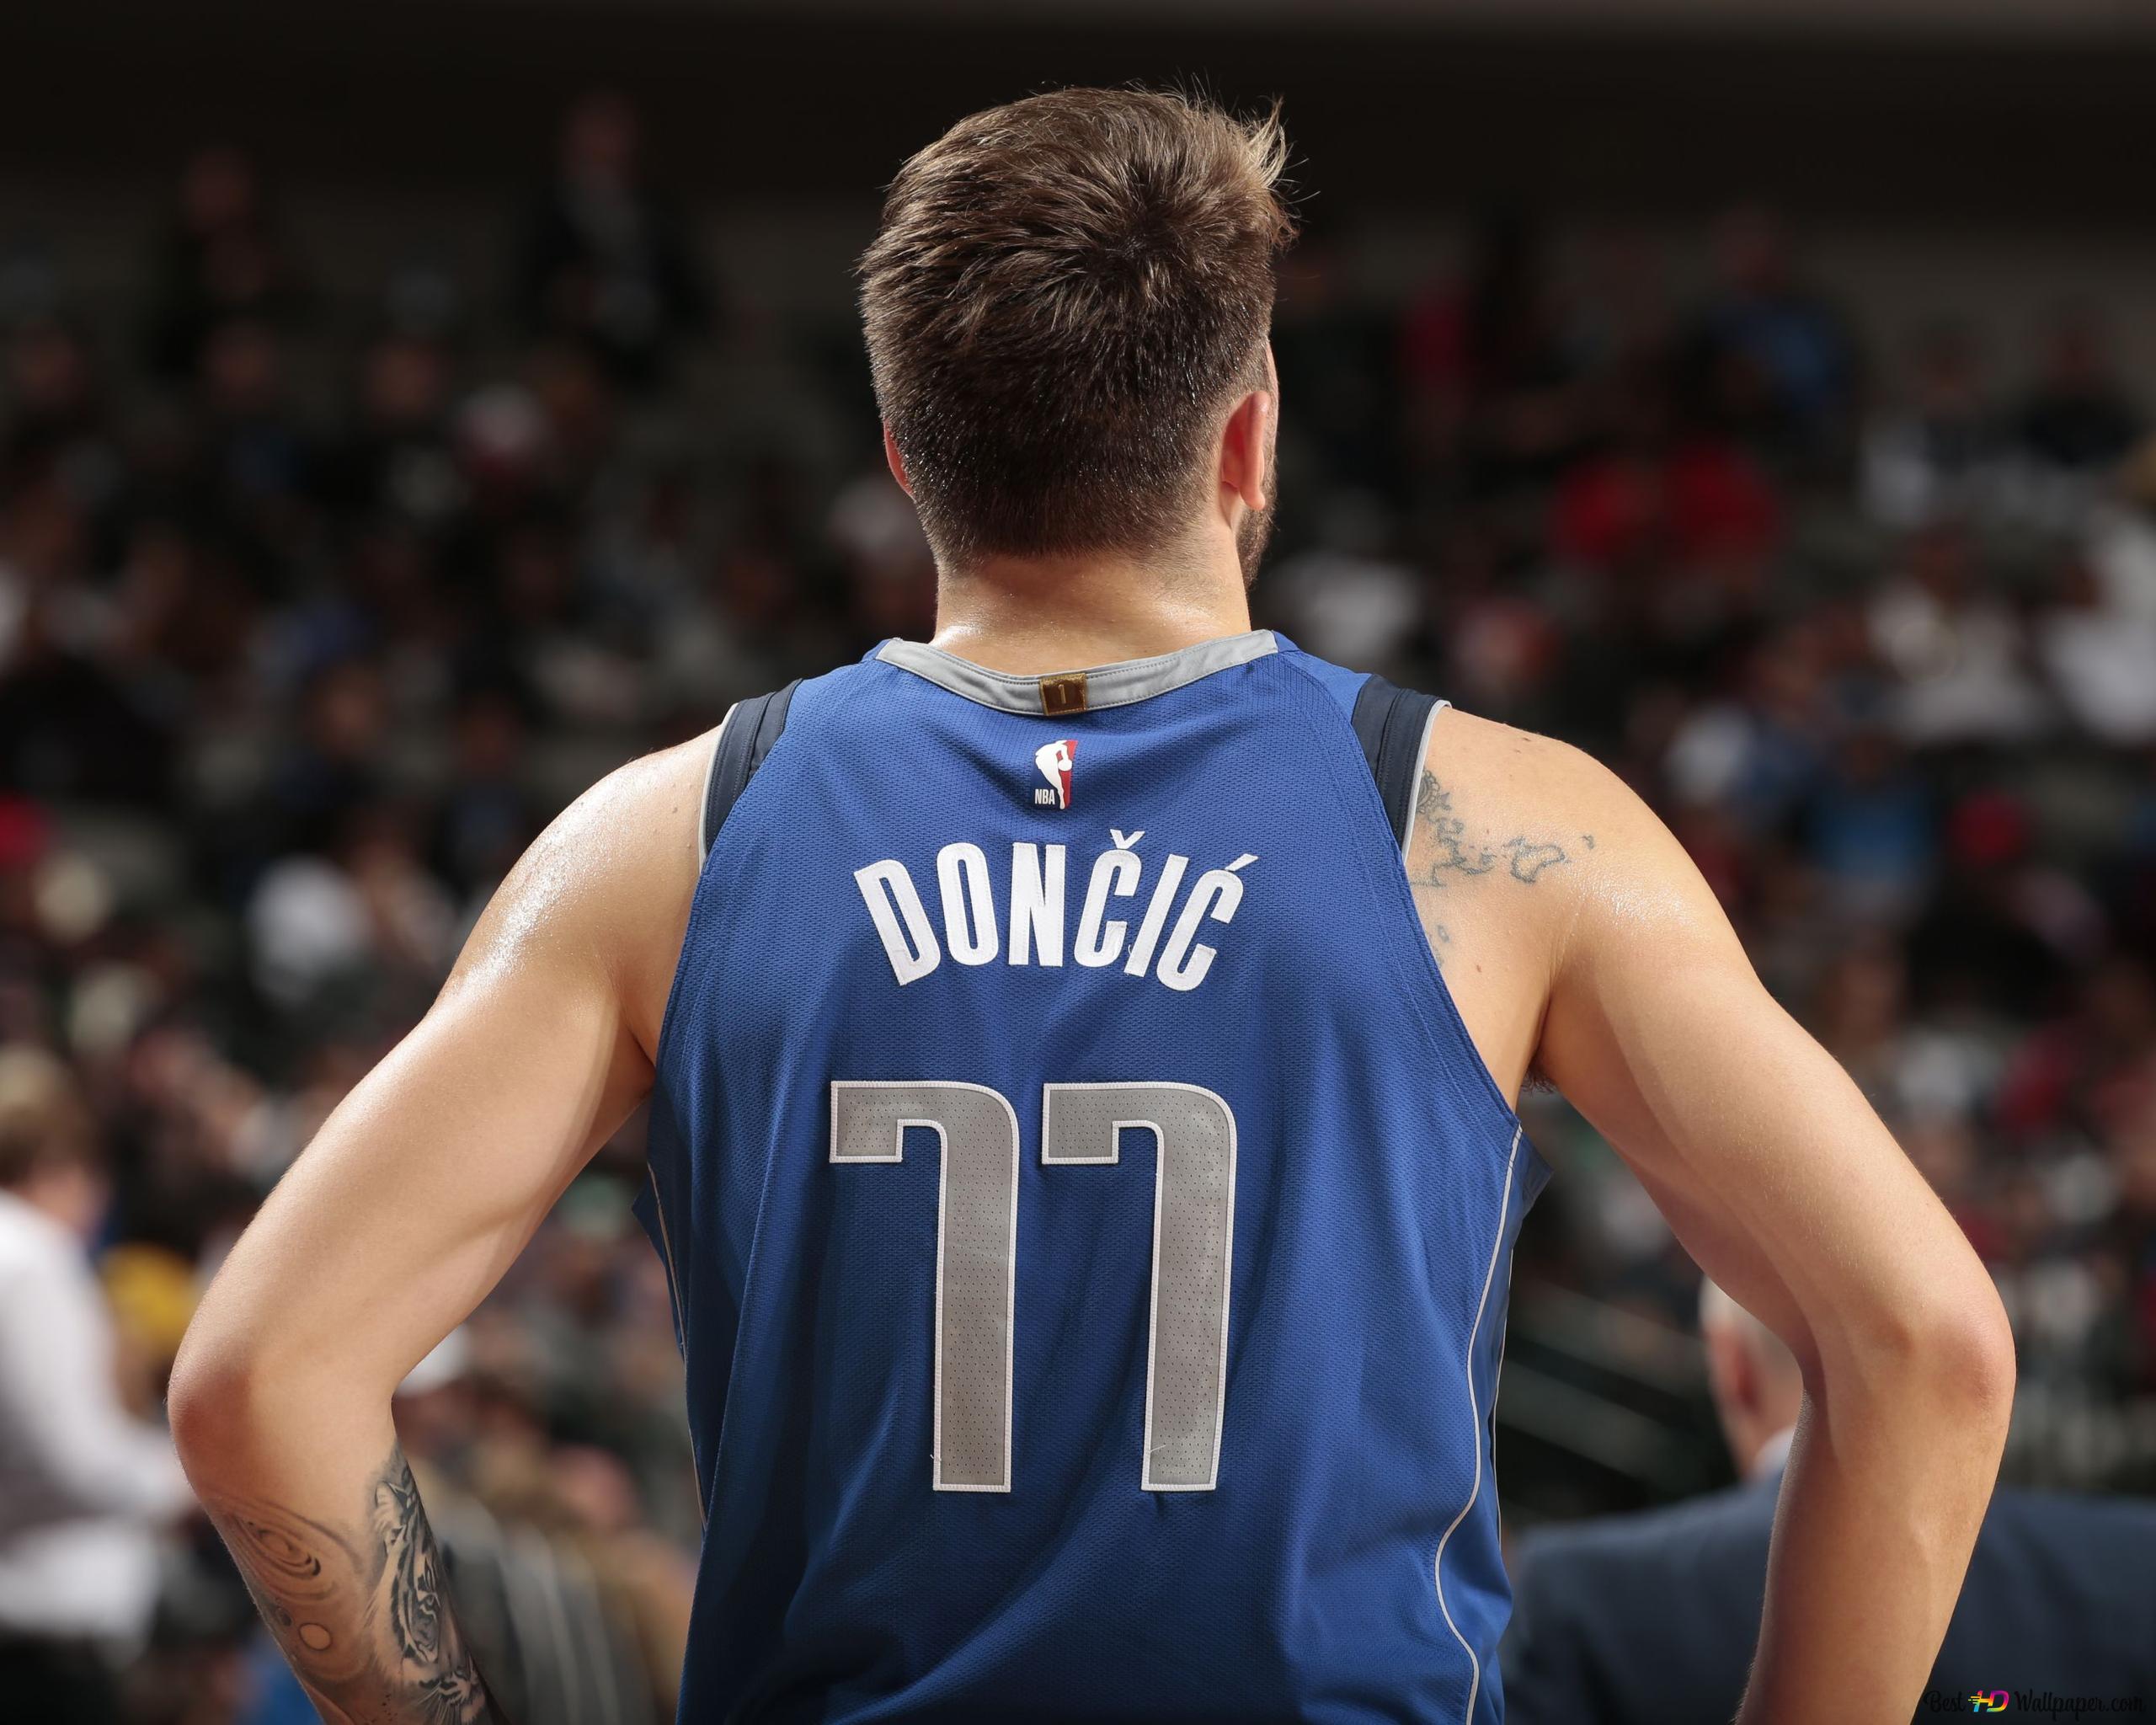 Luka dončić with his back turned and the audience in the background 2K wallpaper download